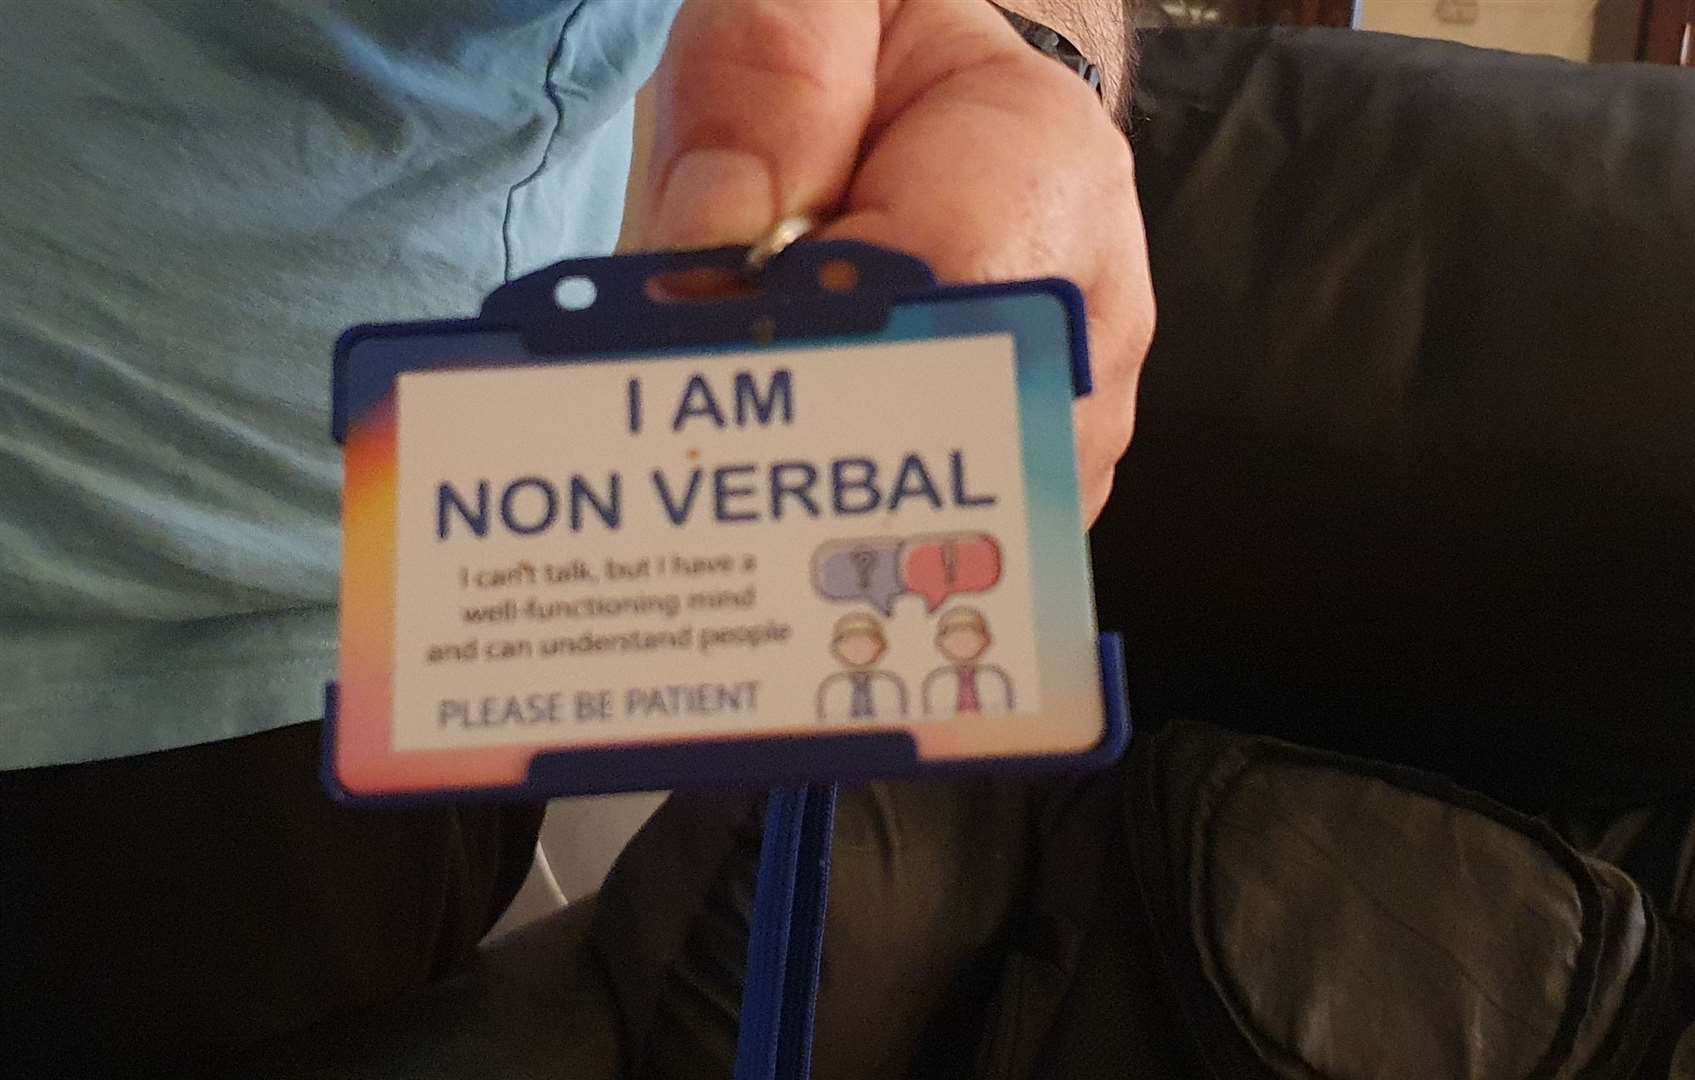 A lanyard Robert made for Garry so people understand although he's non-verbal he is fully cognizant and aware